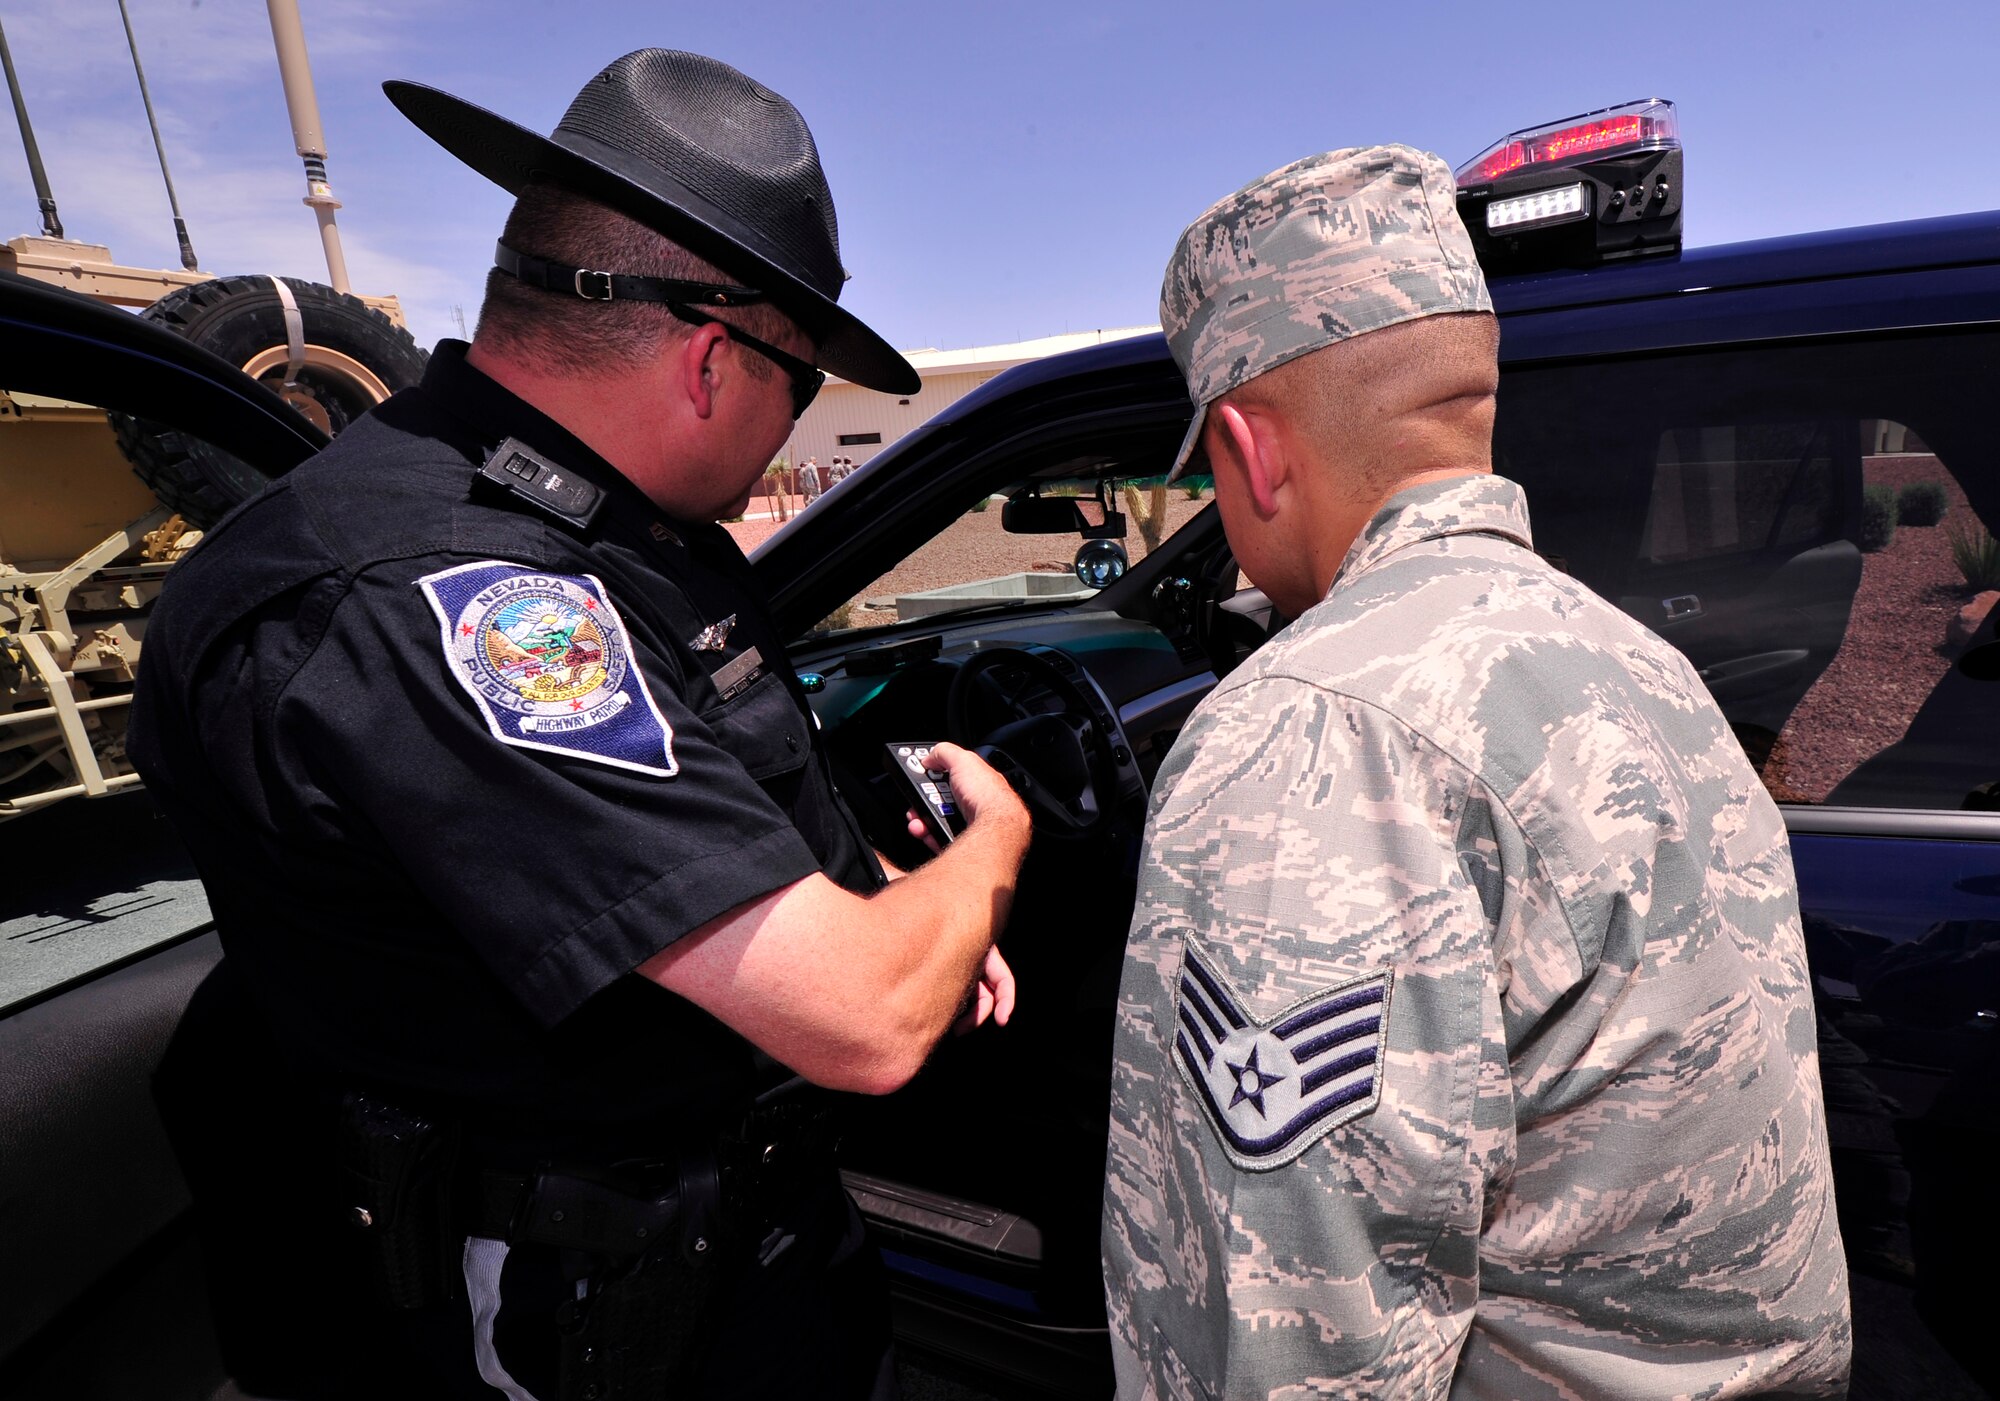 LAS VEGAS, Nev. -- A Nevada Highway Patrolman shows an Airman his radar system during a static display demonstration as part of National Police Week, May 14, 2013. In addition to the Nevada Highway Patrol, members of the 99th Ground Combat Training Squadron showcased various Air Force assets. National Police Week was established in 1962 to honor the service and sacrifices of past and present members of U.S. law enforcement agencies.  (U.S. Air Force photo by Staff Sgt. A.D./Released)